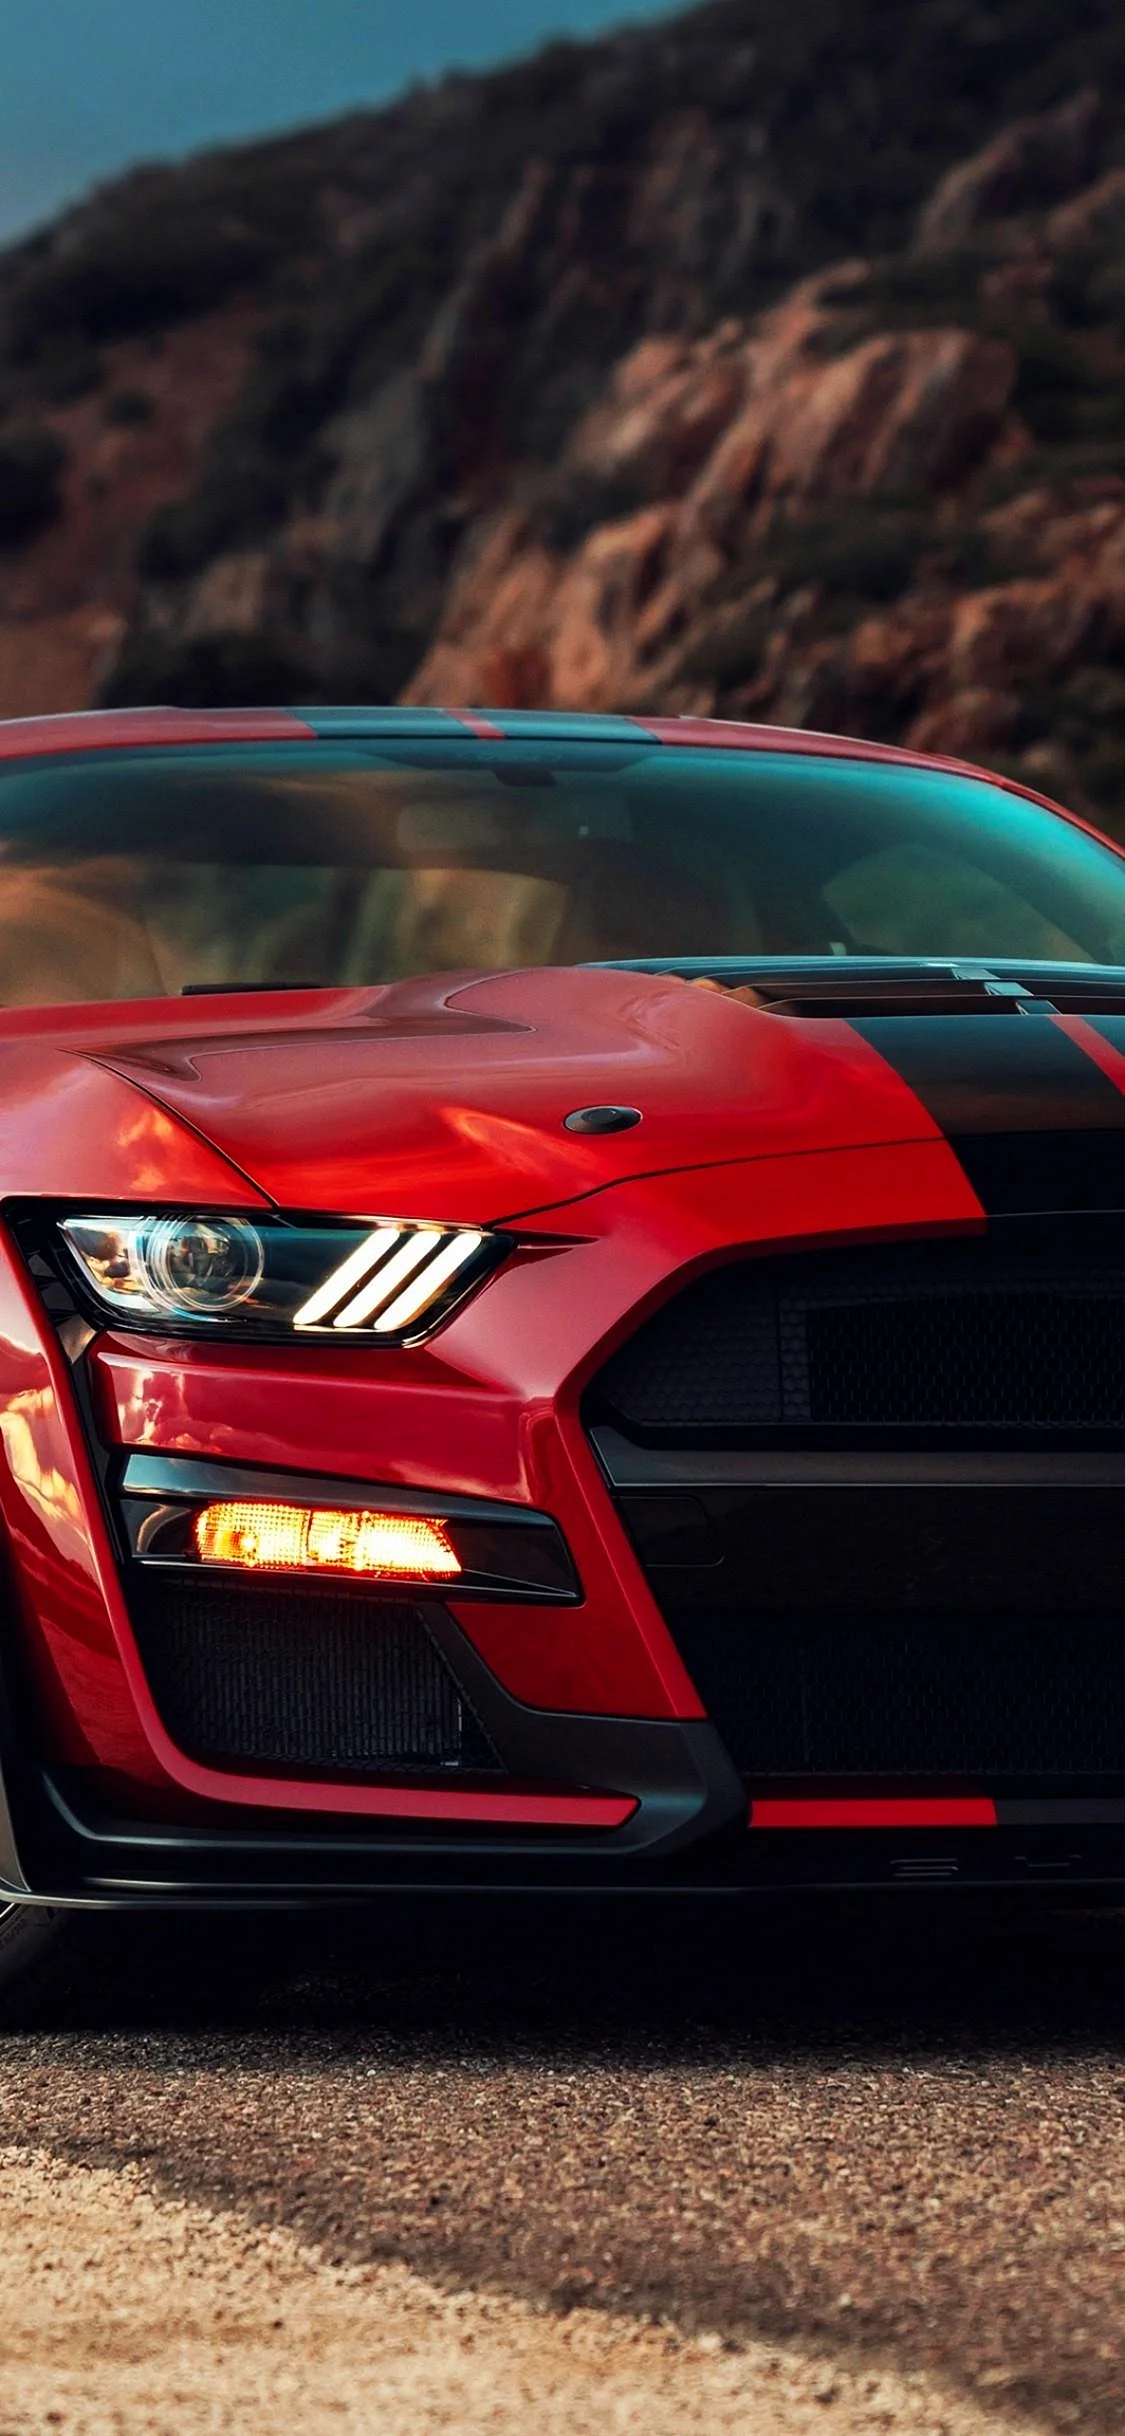 2020 Ford Mustang Shelby Gt 500 Wallpaper for iPhone 11 Pro